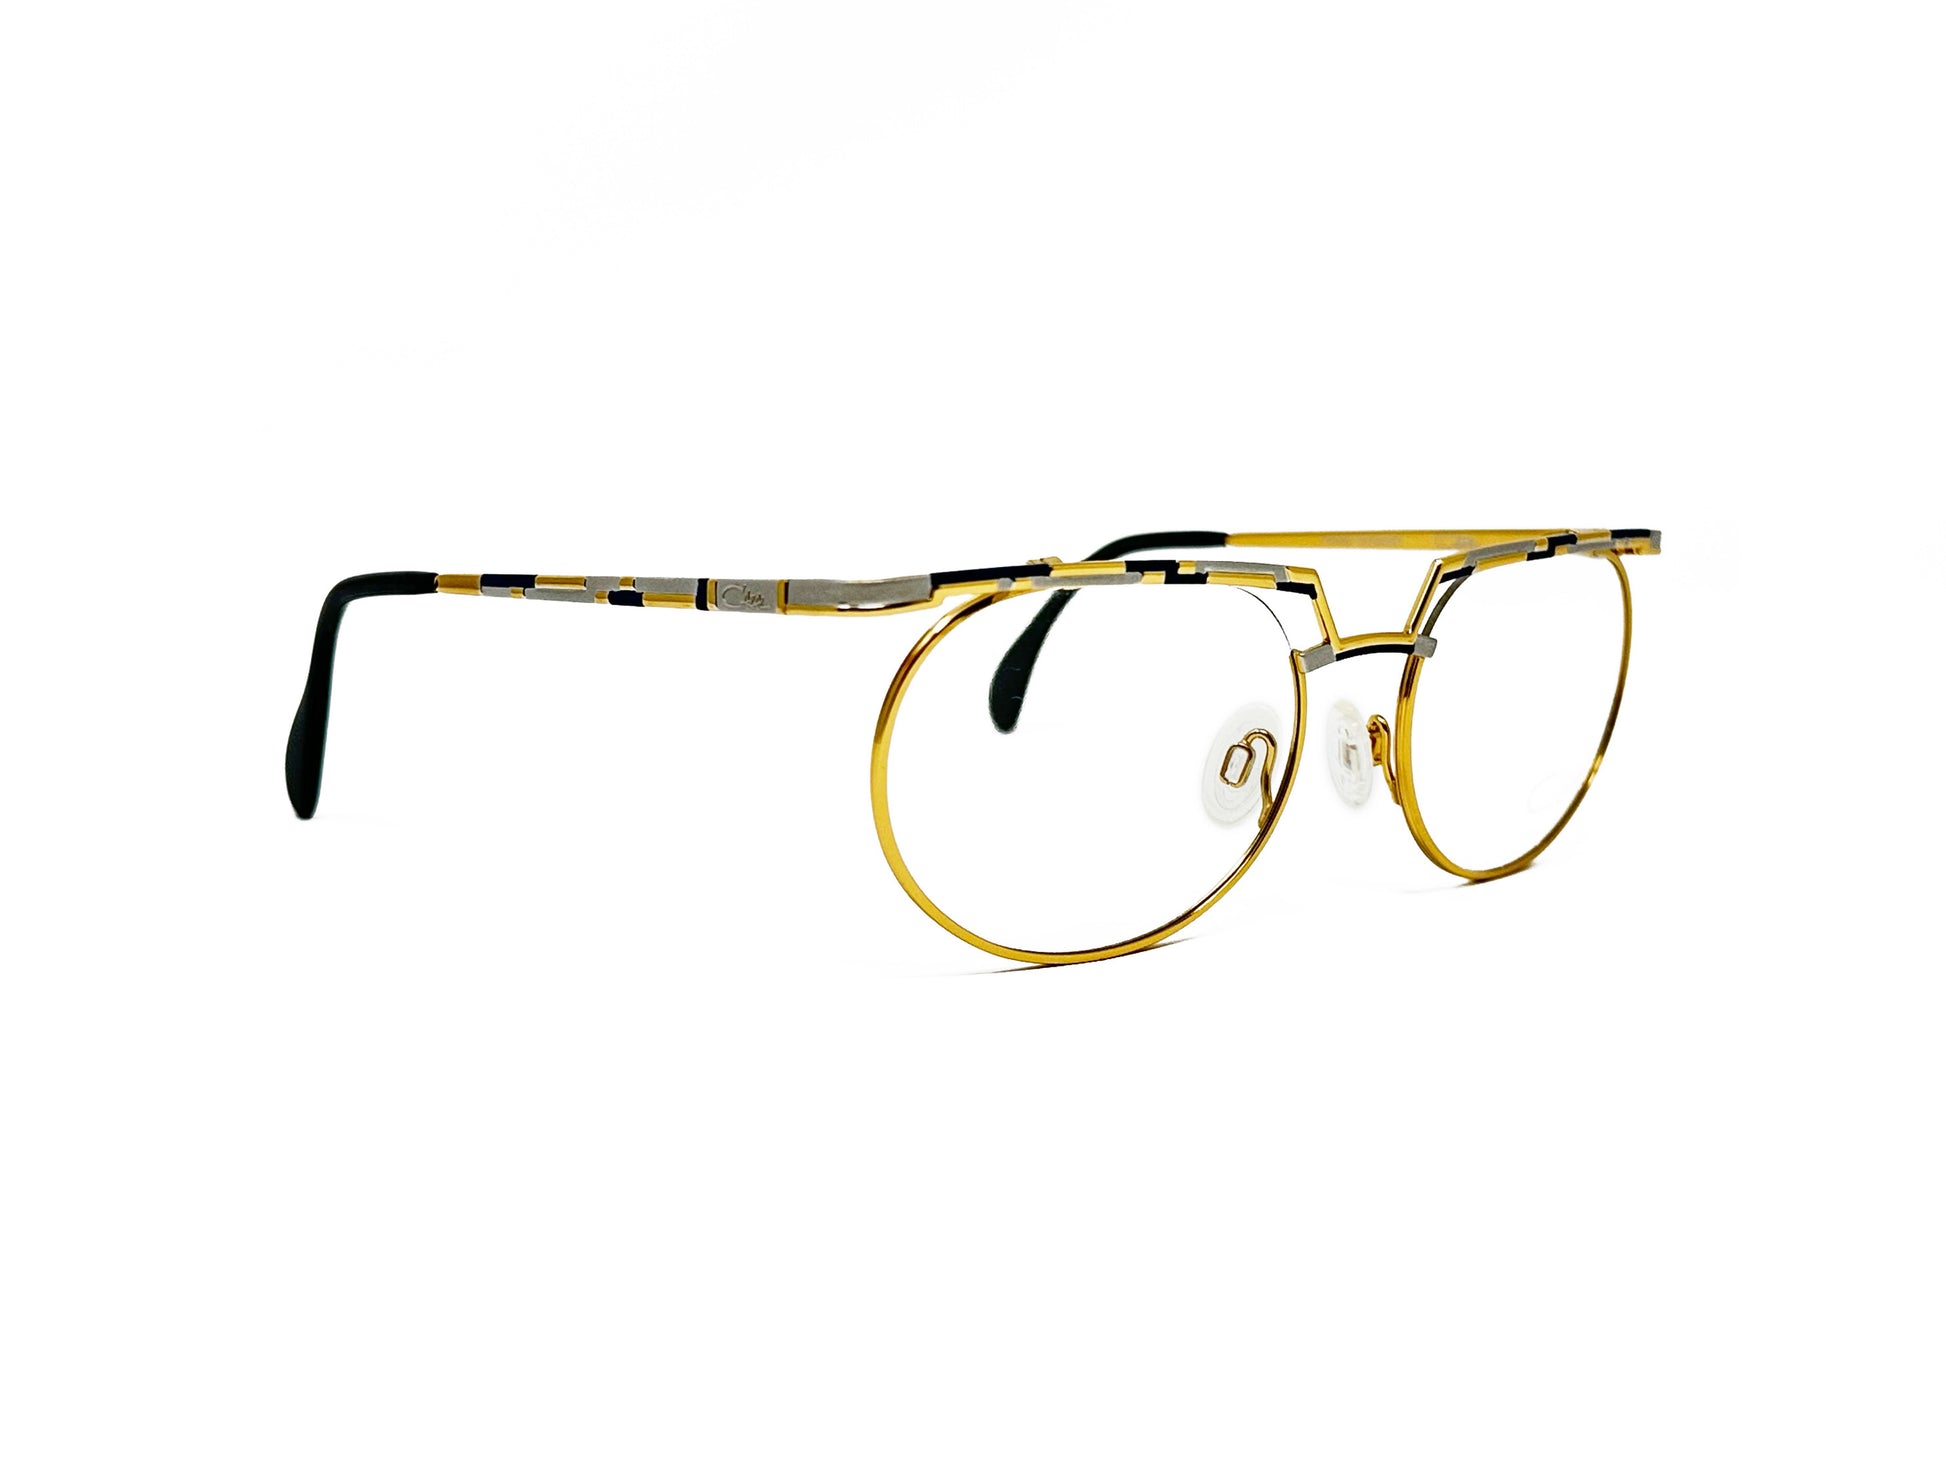 Cazal round, metal optical frame with straight bar across top. Model: 268. Color: 481 Gold. Side view.